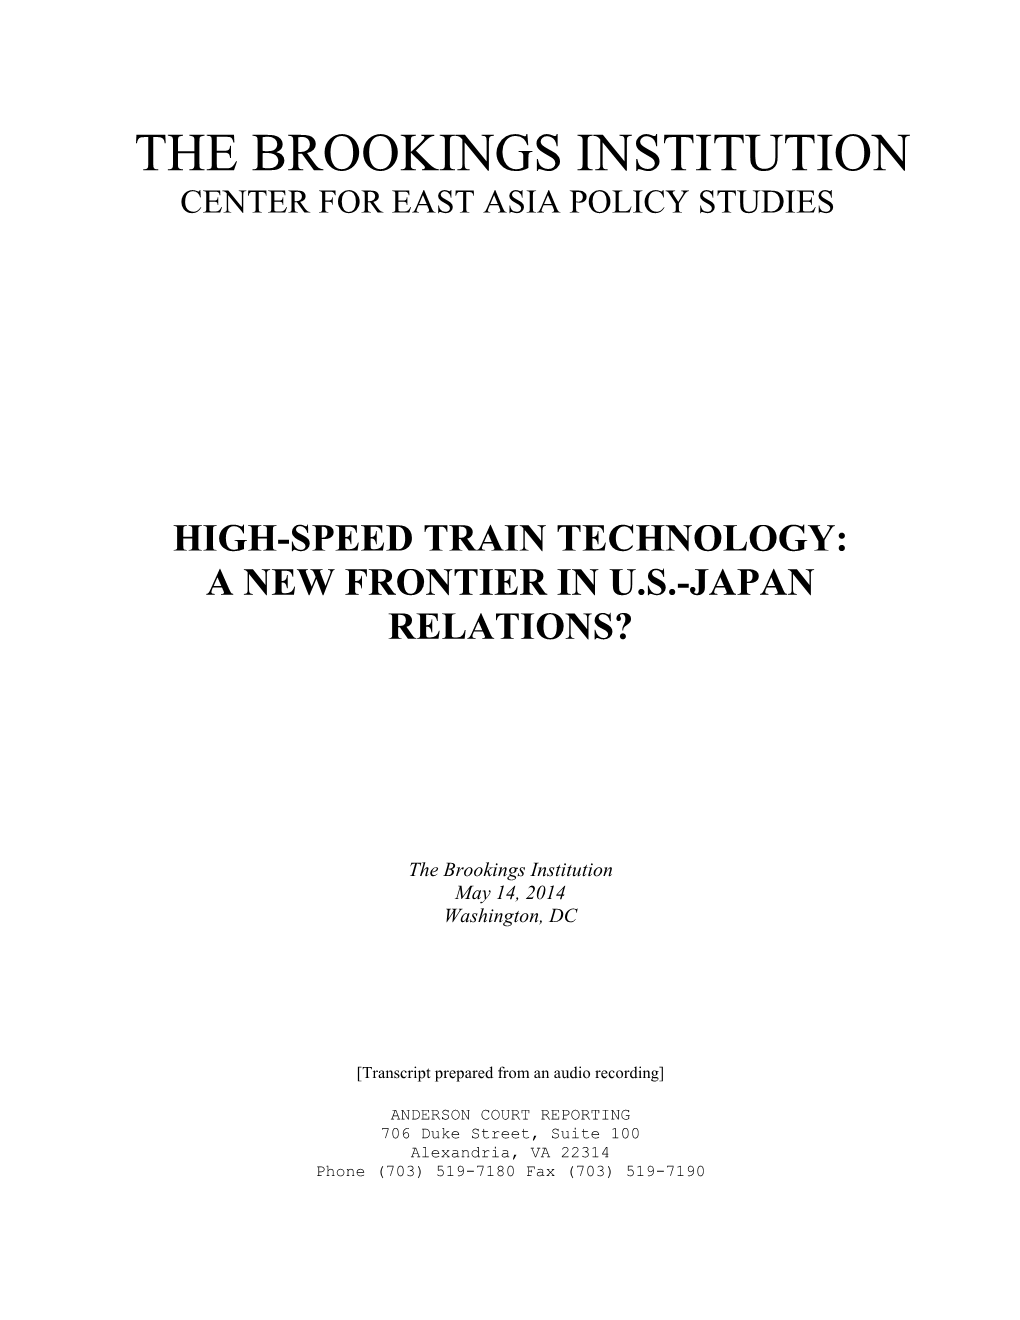 High-Speed Train Technology: a New Frontier in Us-Japan Relations?